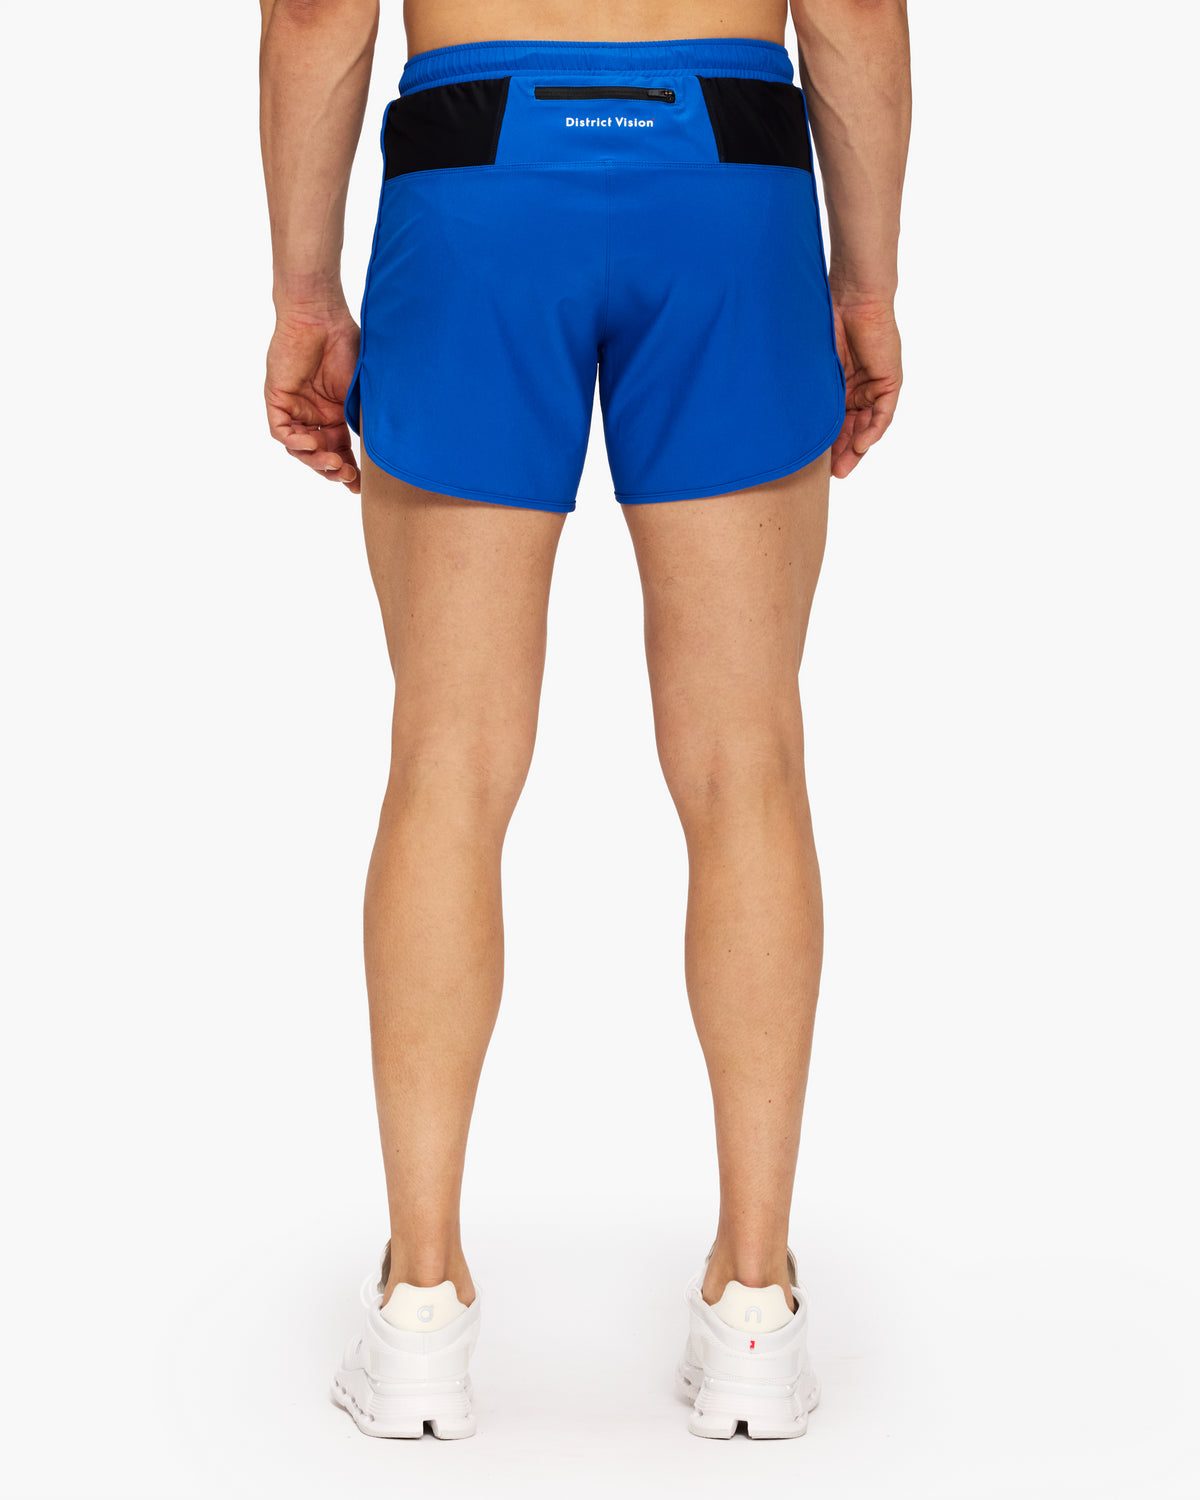 District Vision Training Shorts  5" - Unlined